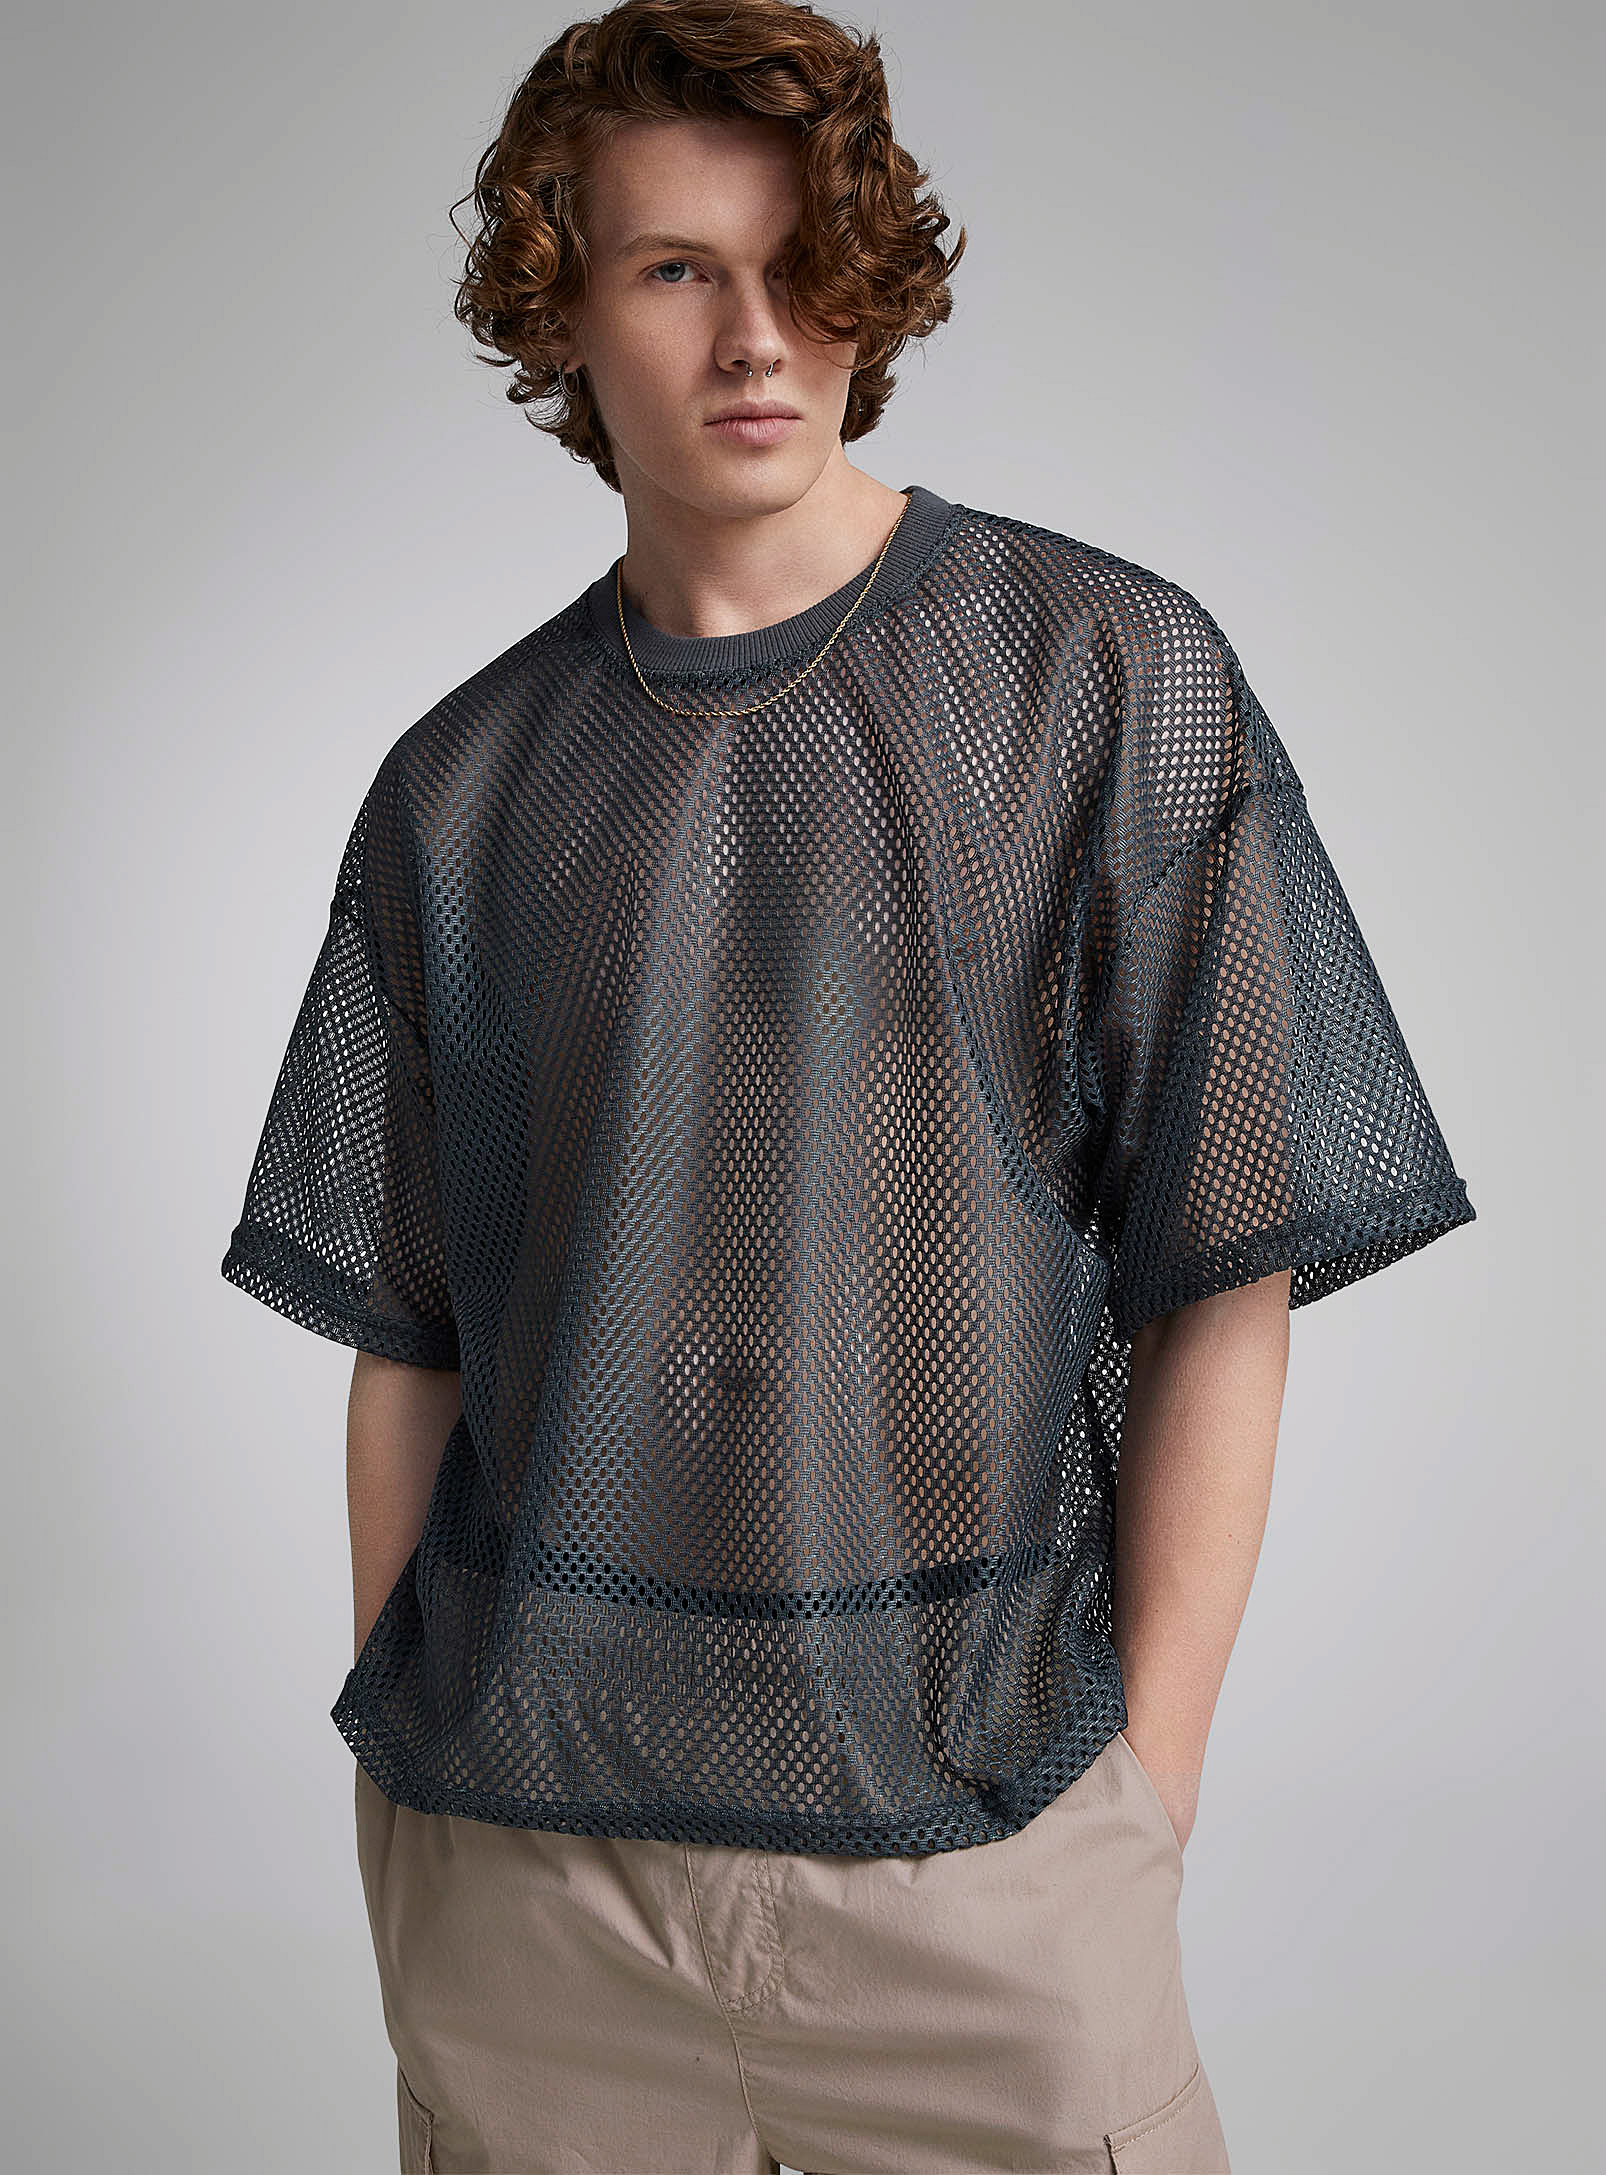 Djab Boxy Openwork Mesh T-shirt In Patterned Green